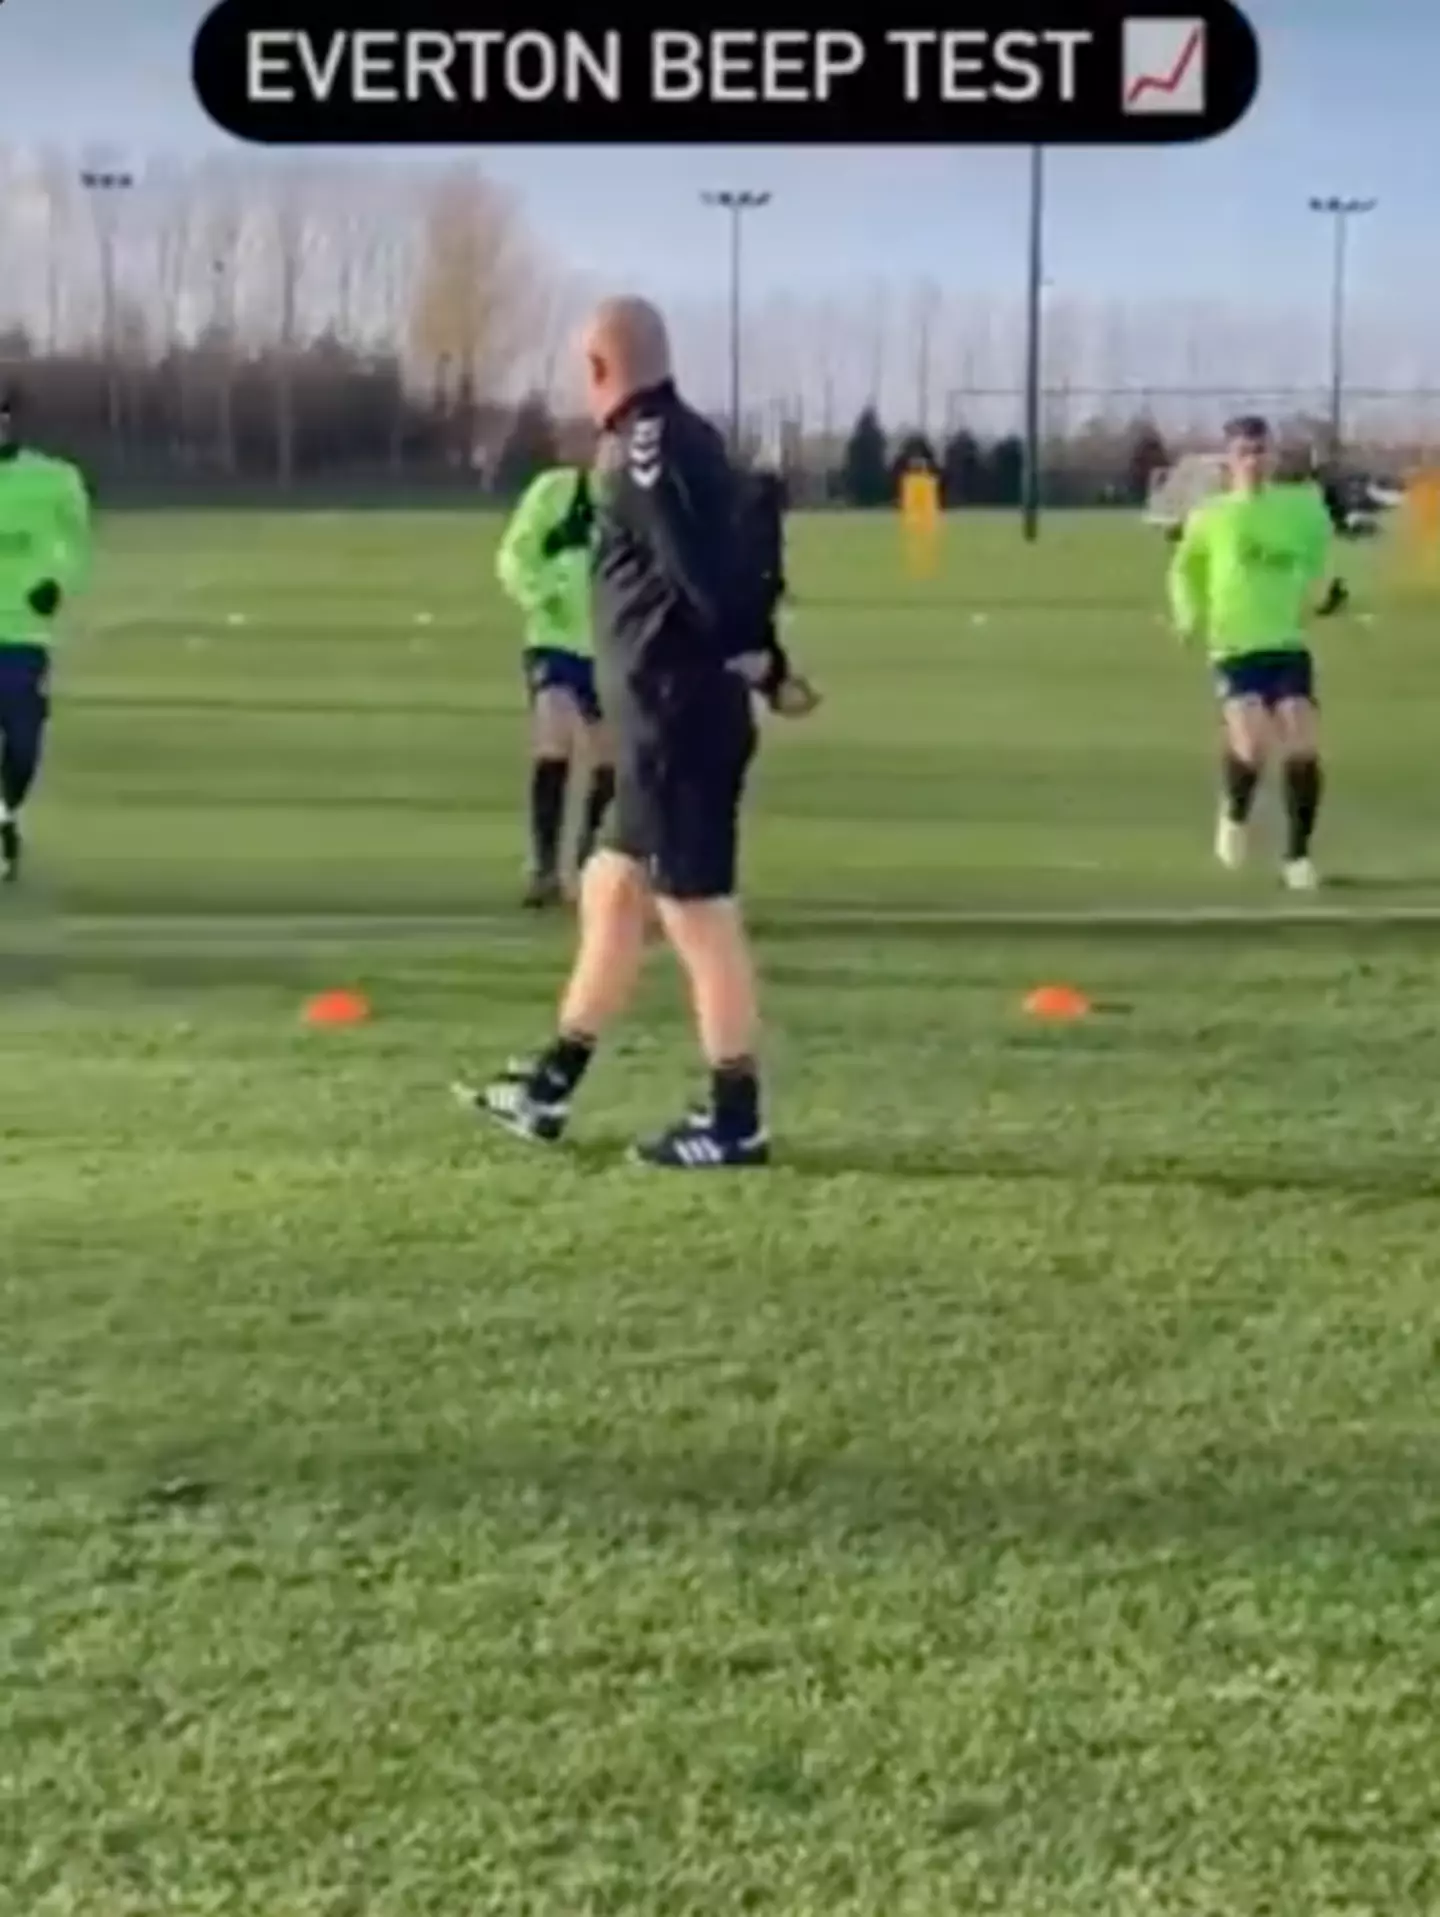 Burnley legend Sean Dyche turned up in his shorts for Everton’s beep test session.